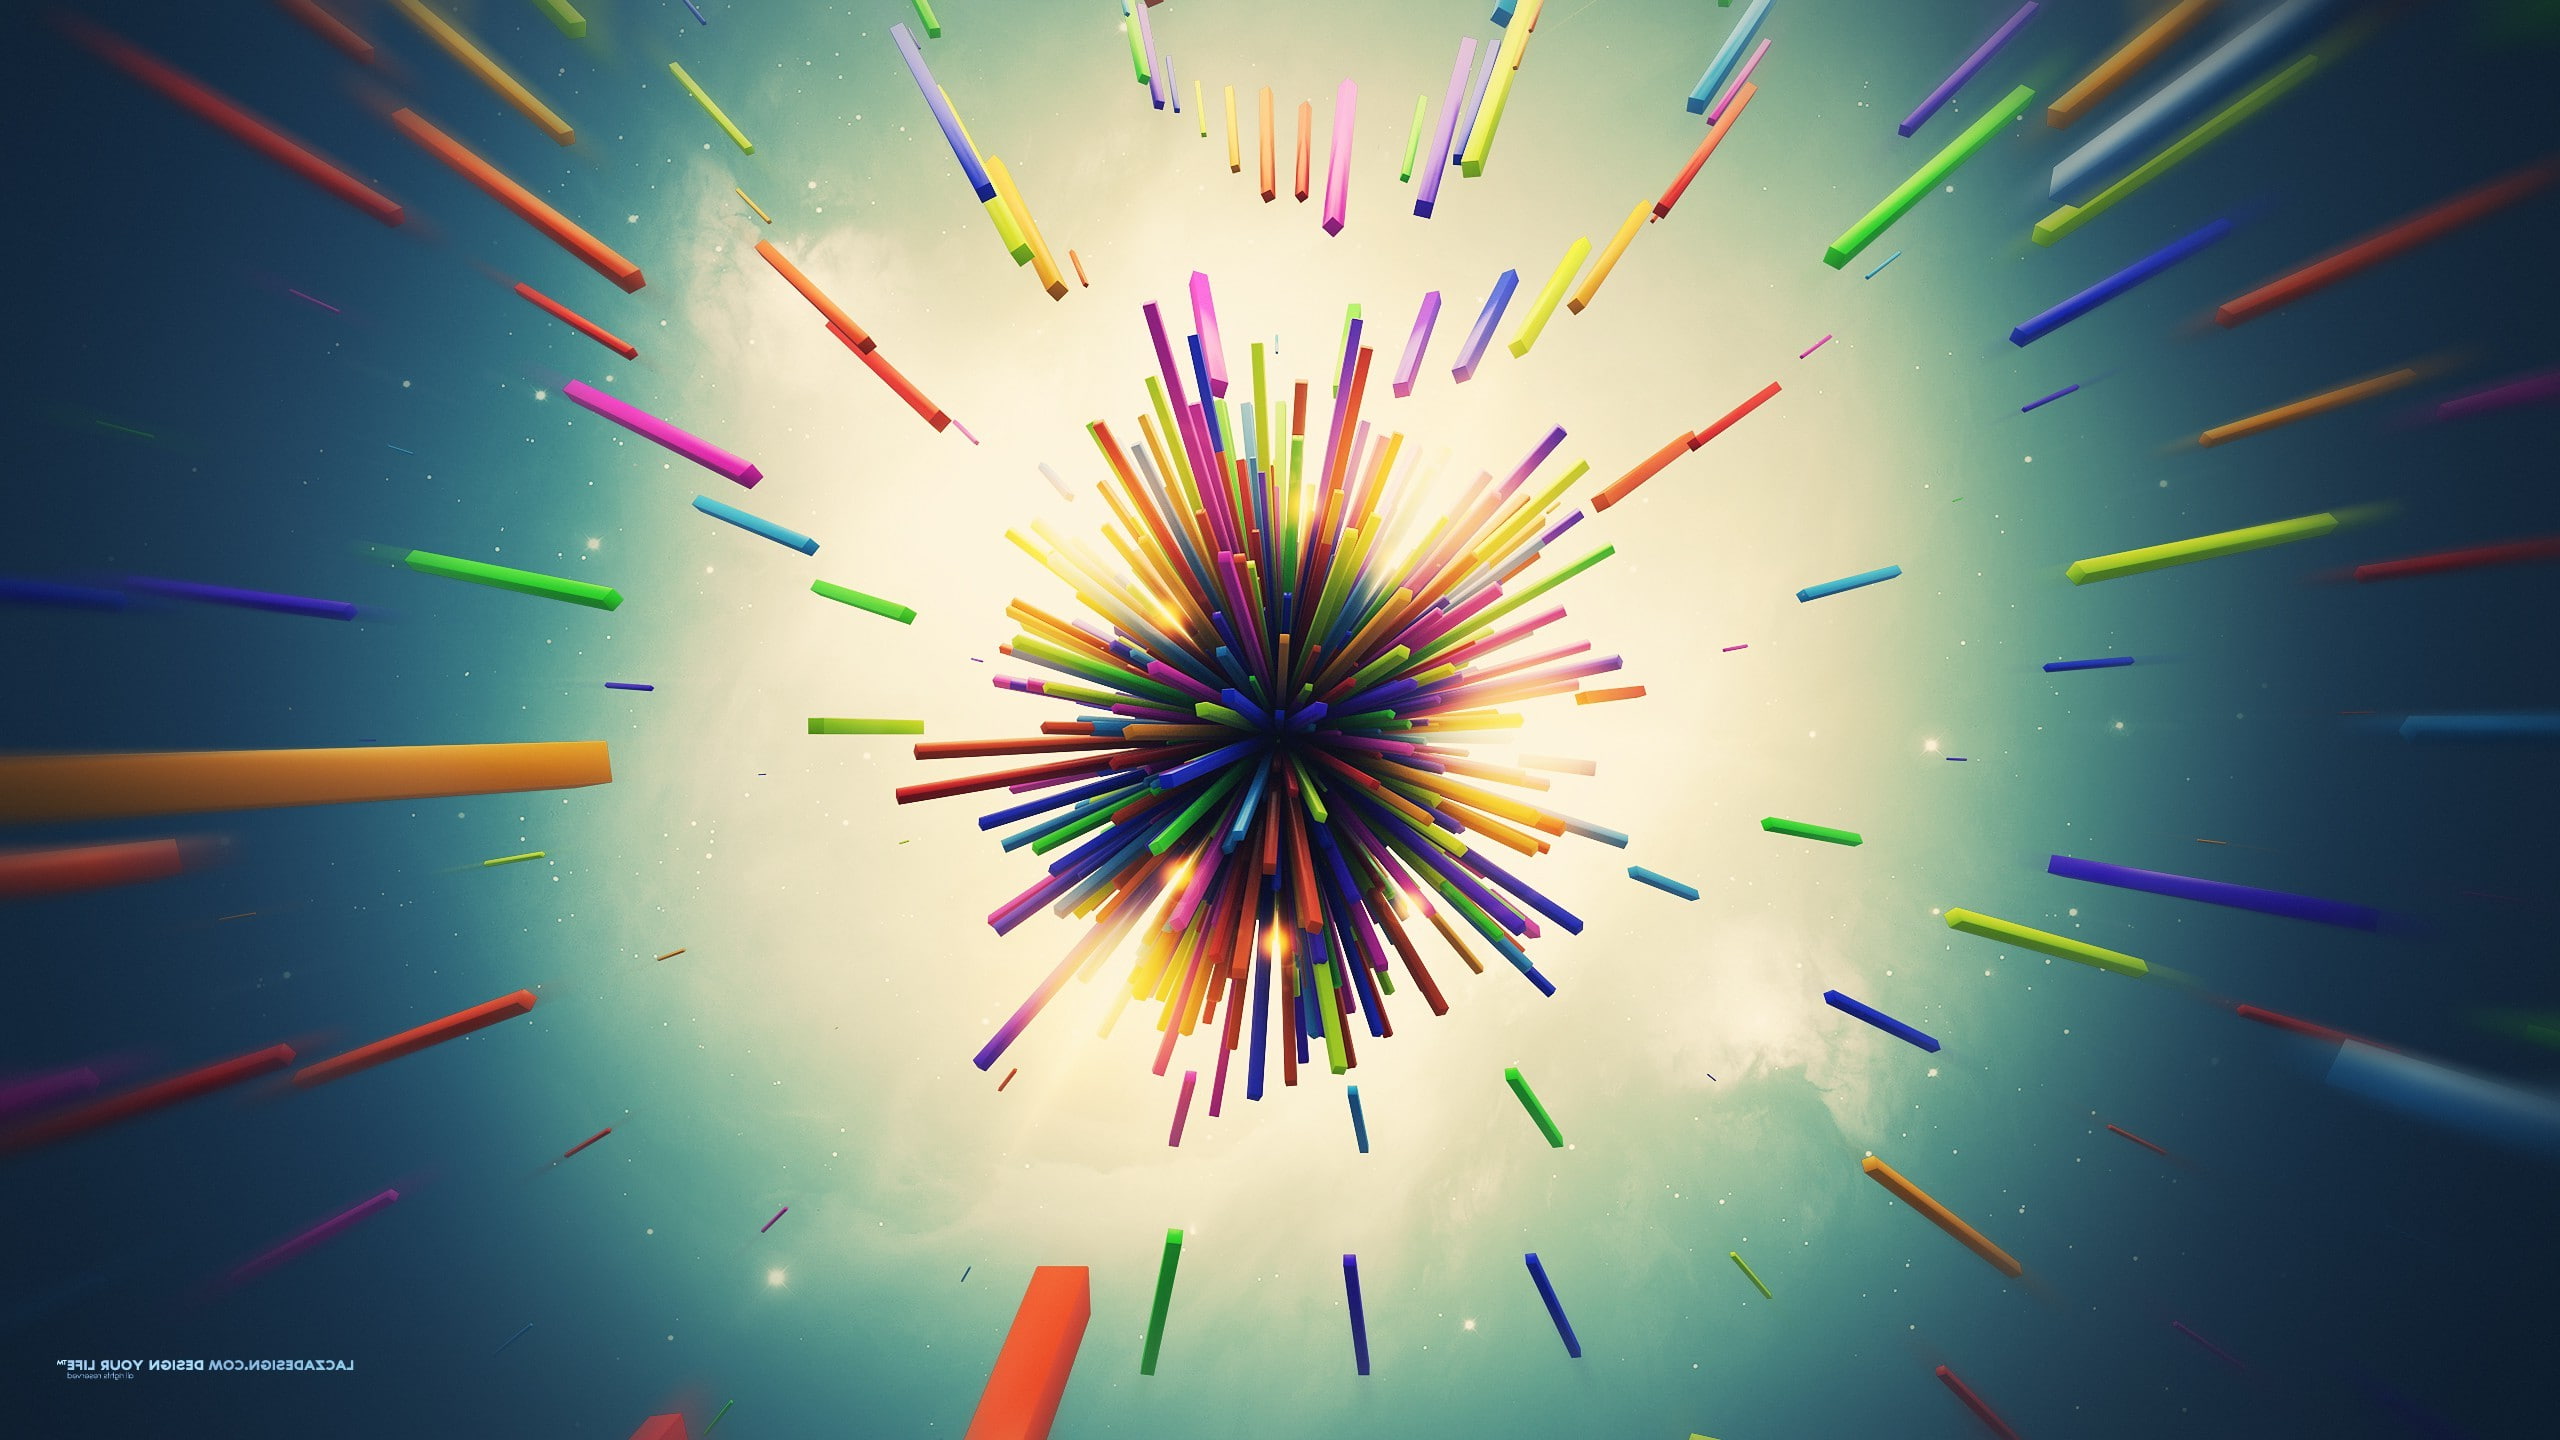 3d, abstract, Colorful, digital art, Explosion, Lacza, shapes